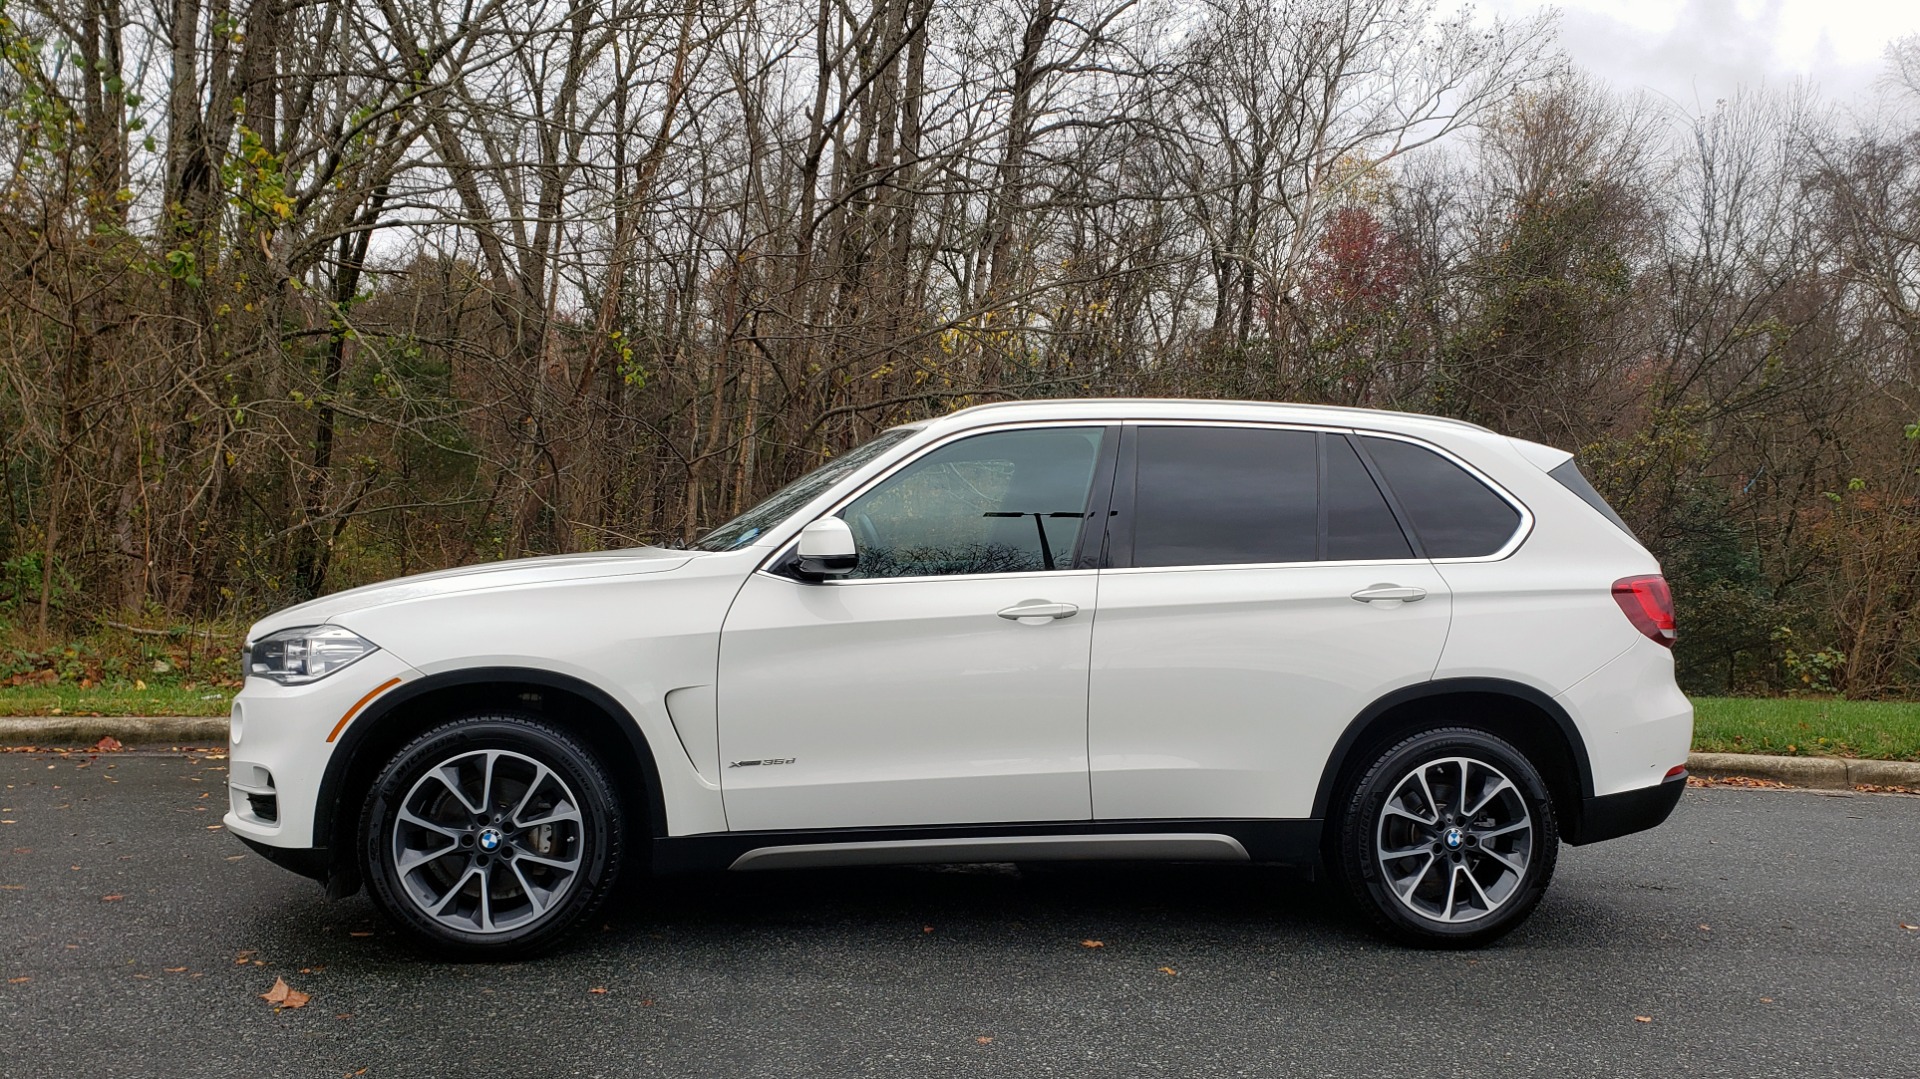 Used 2017 BMW X5 XDRIVE35D / AWD / NAV / DIESEL / SUNROOF / REARVIEW for sale Sold at Formula Imports in Charlotte NC 28227 2